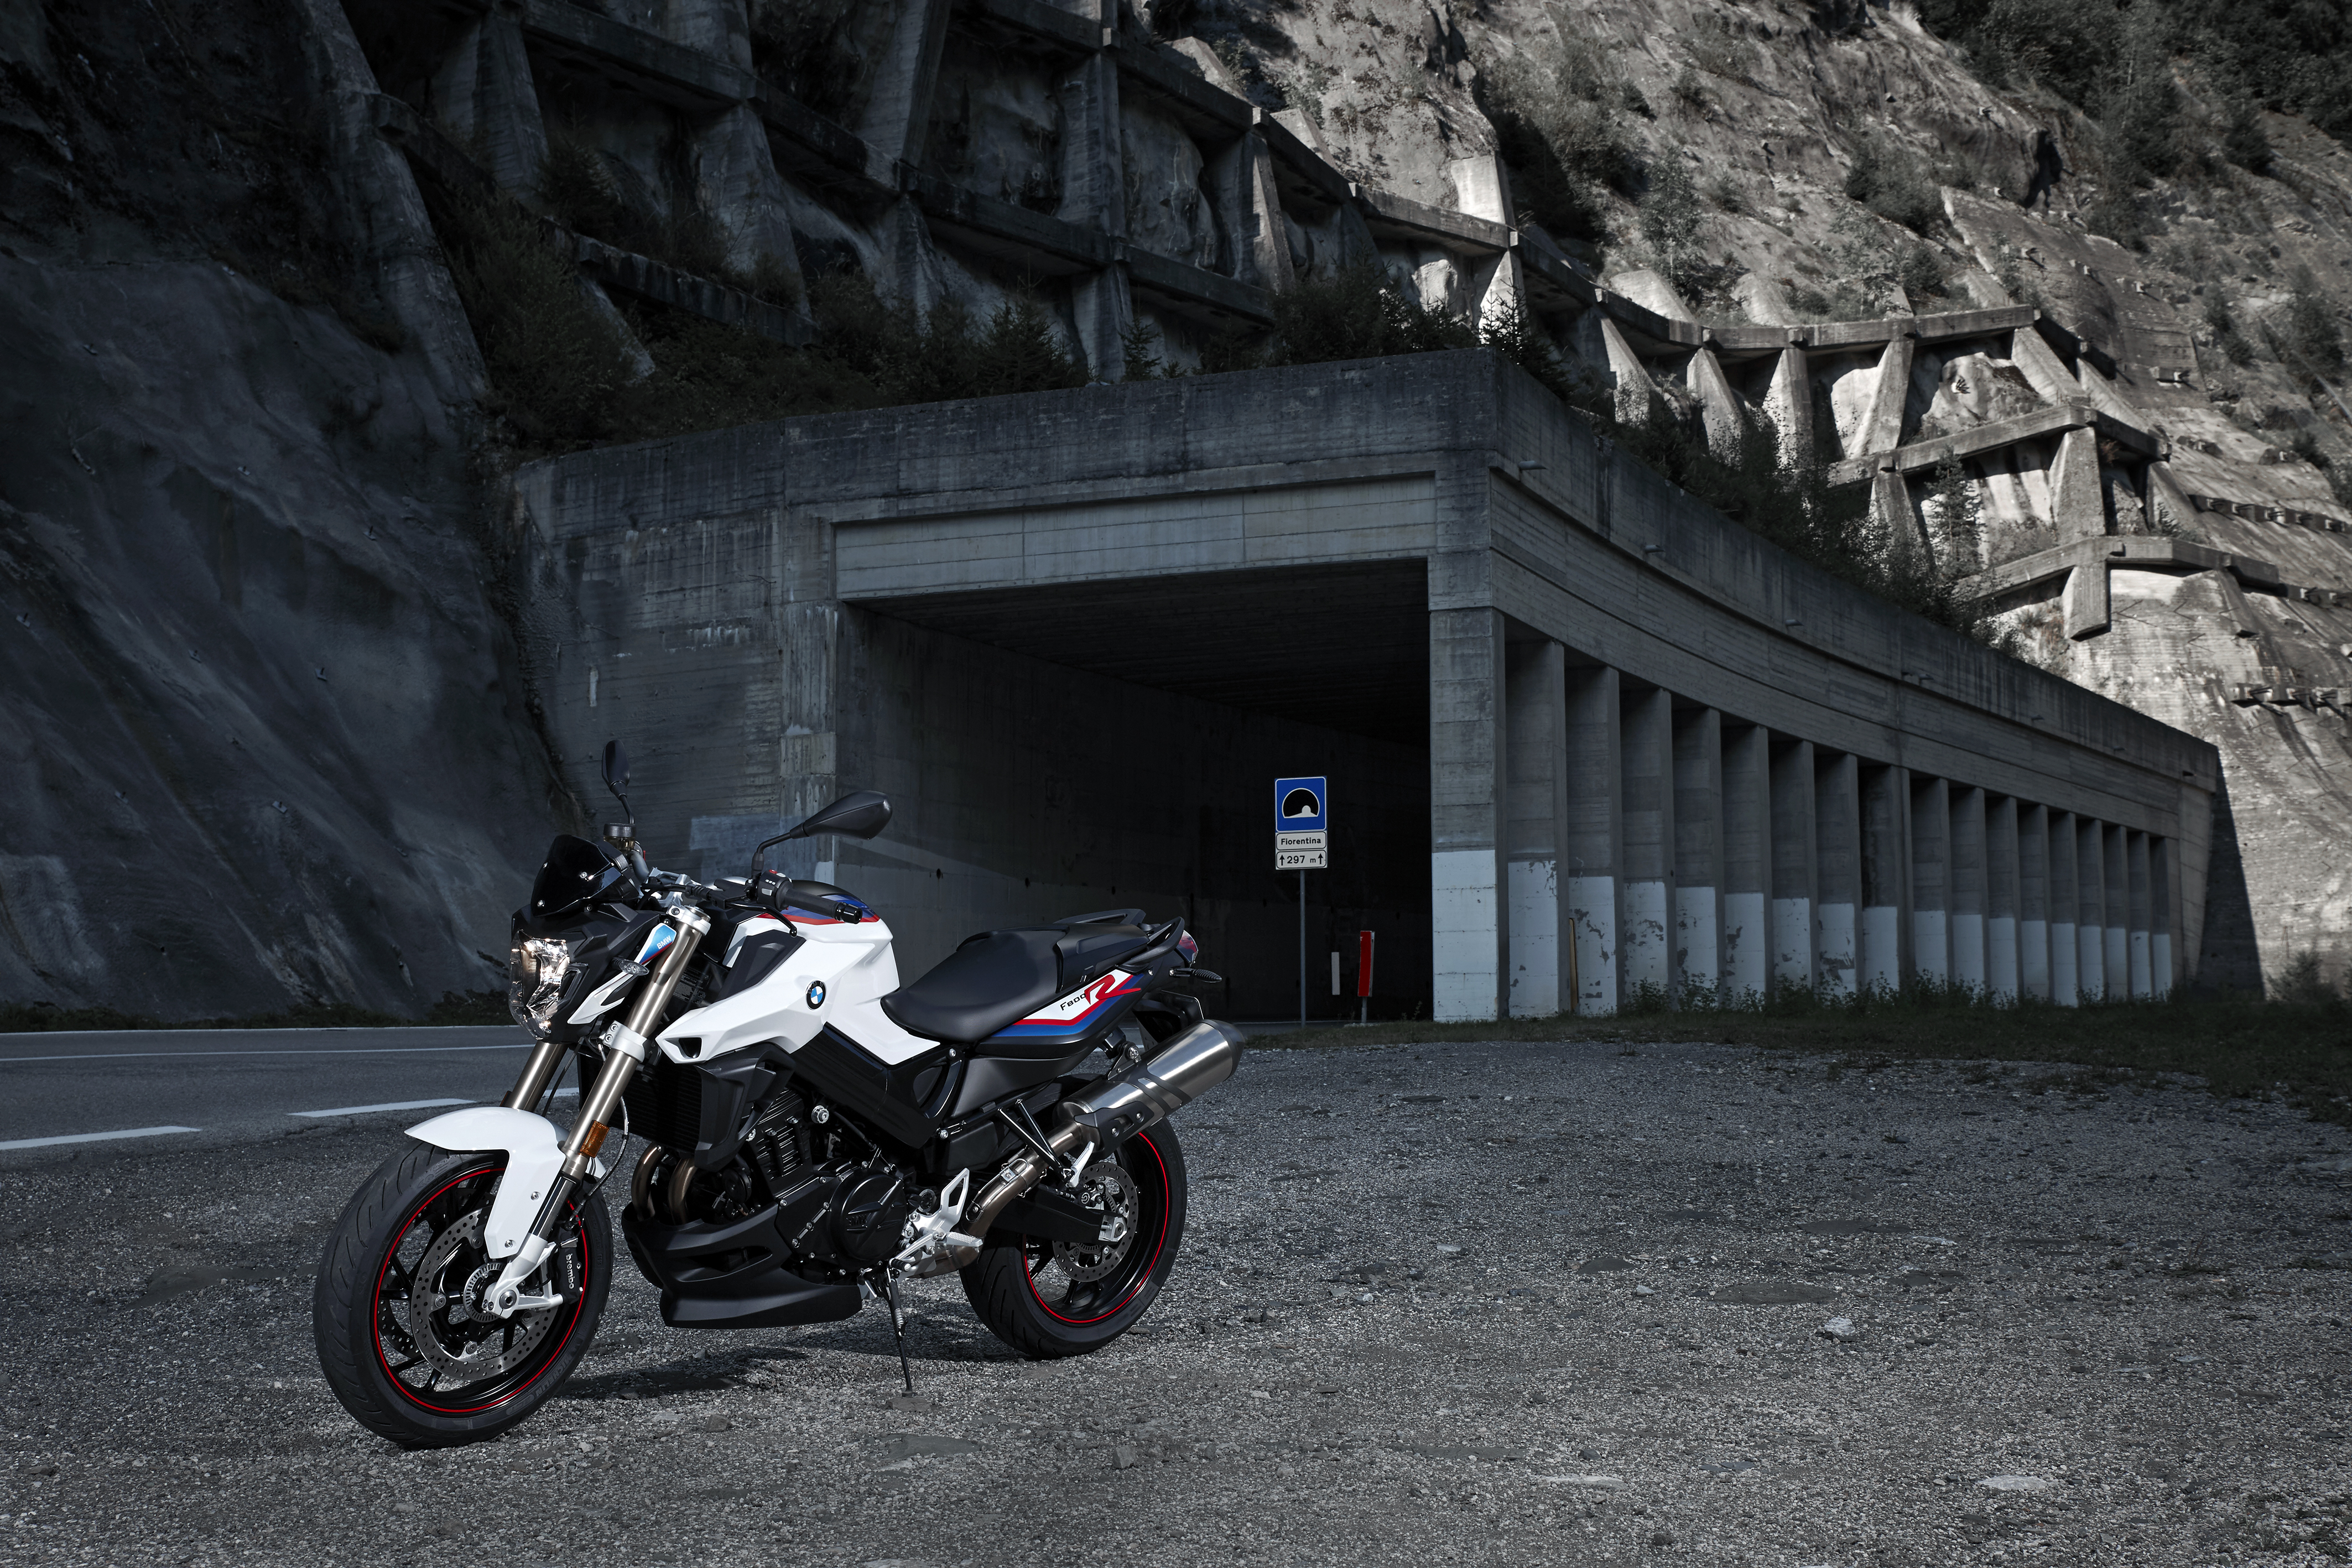 bmw f800r, vehicles, motorcycles